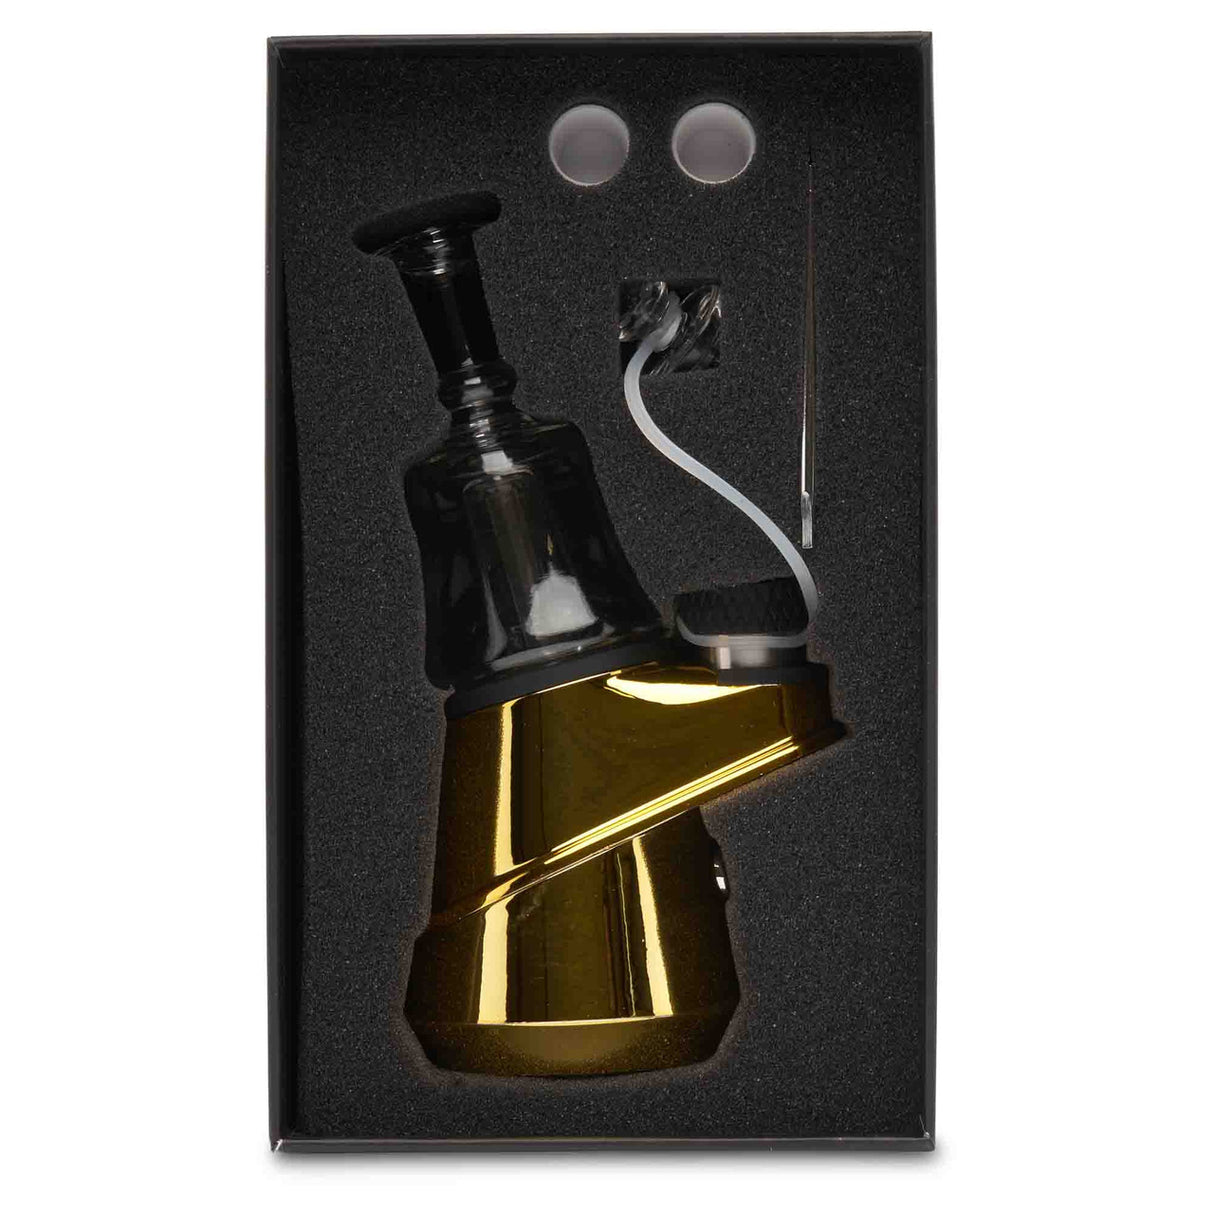 SOC Cloud Puff portable e-nail dab rig for concentrates gold in box